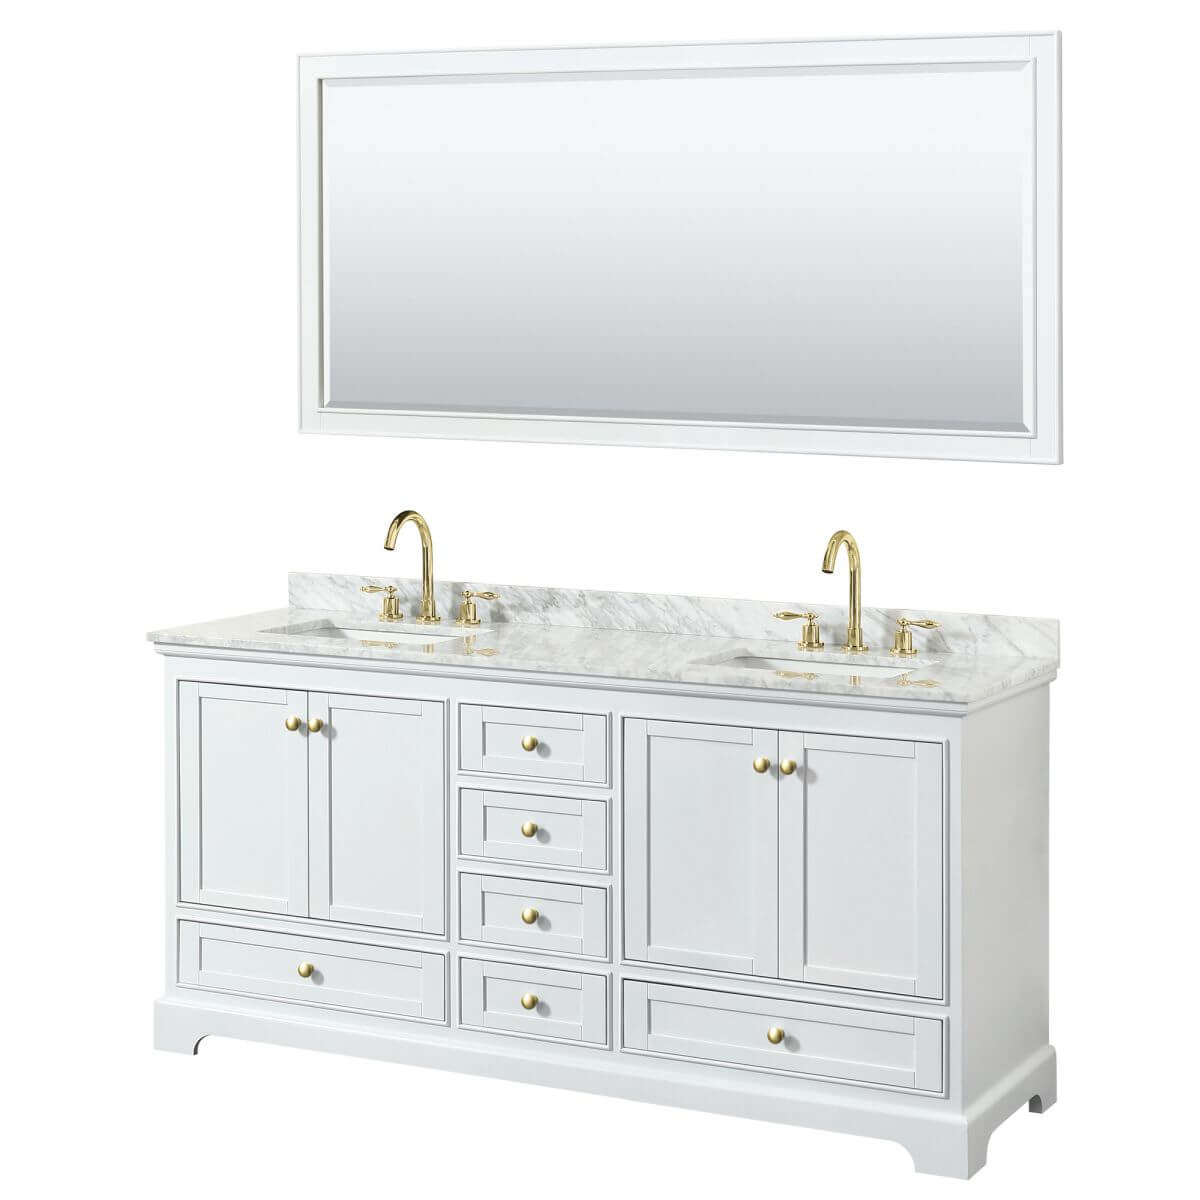 Wyndham Collection Deborah 72 inch Double Bathroom Vanity in White with White Carrara Marble Countertop, Undermount Square Sinks, Brushed Gold Trim and 70 inch Mirror - WCS202072DWGCMUNSM70